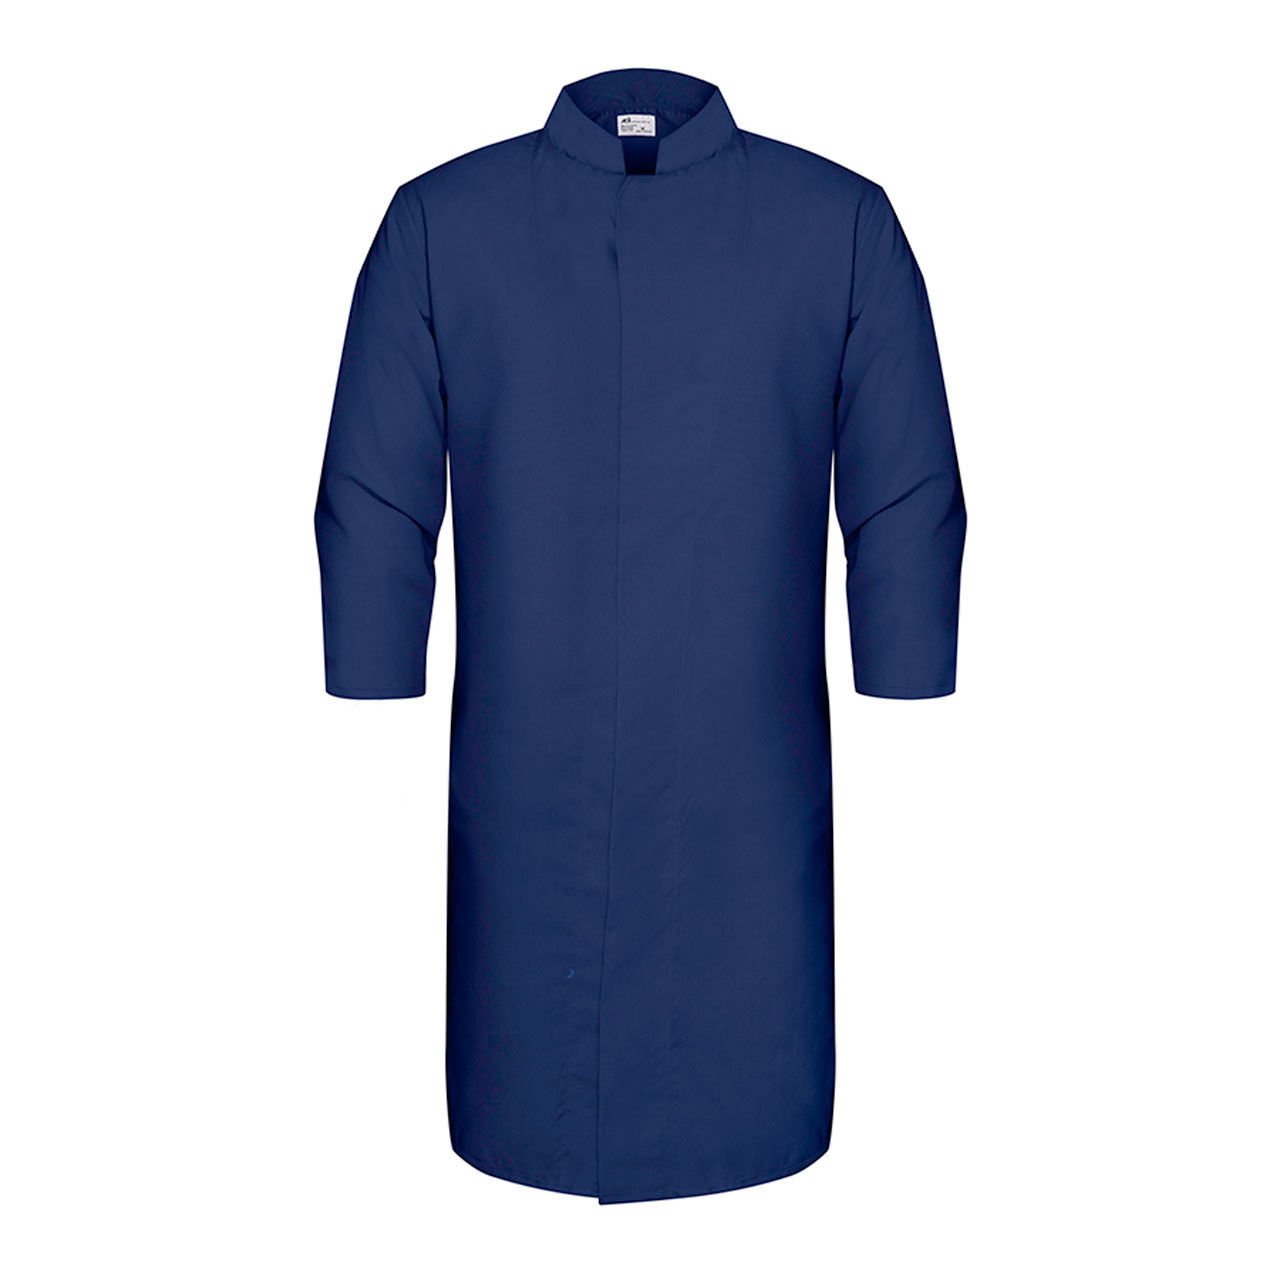 What is the fabric composition of the HACCP Lab Coat in Navy Blue?